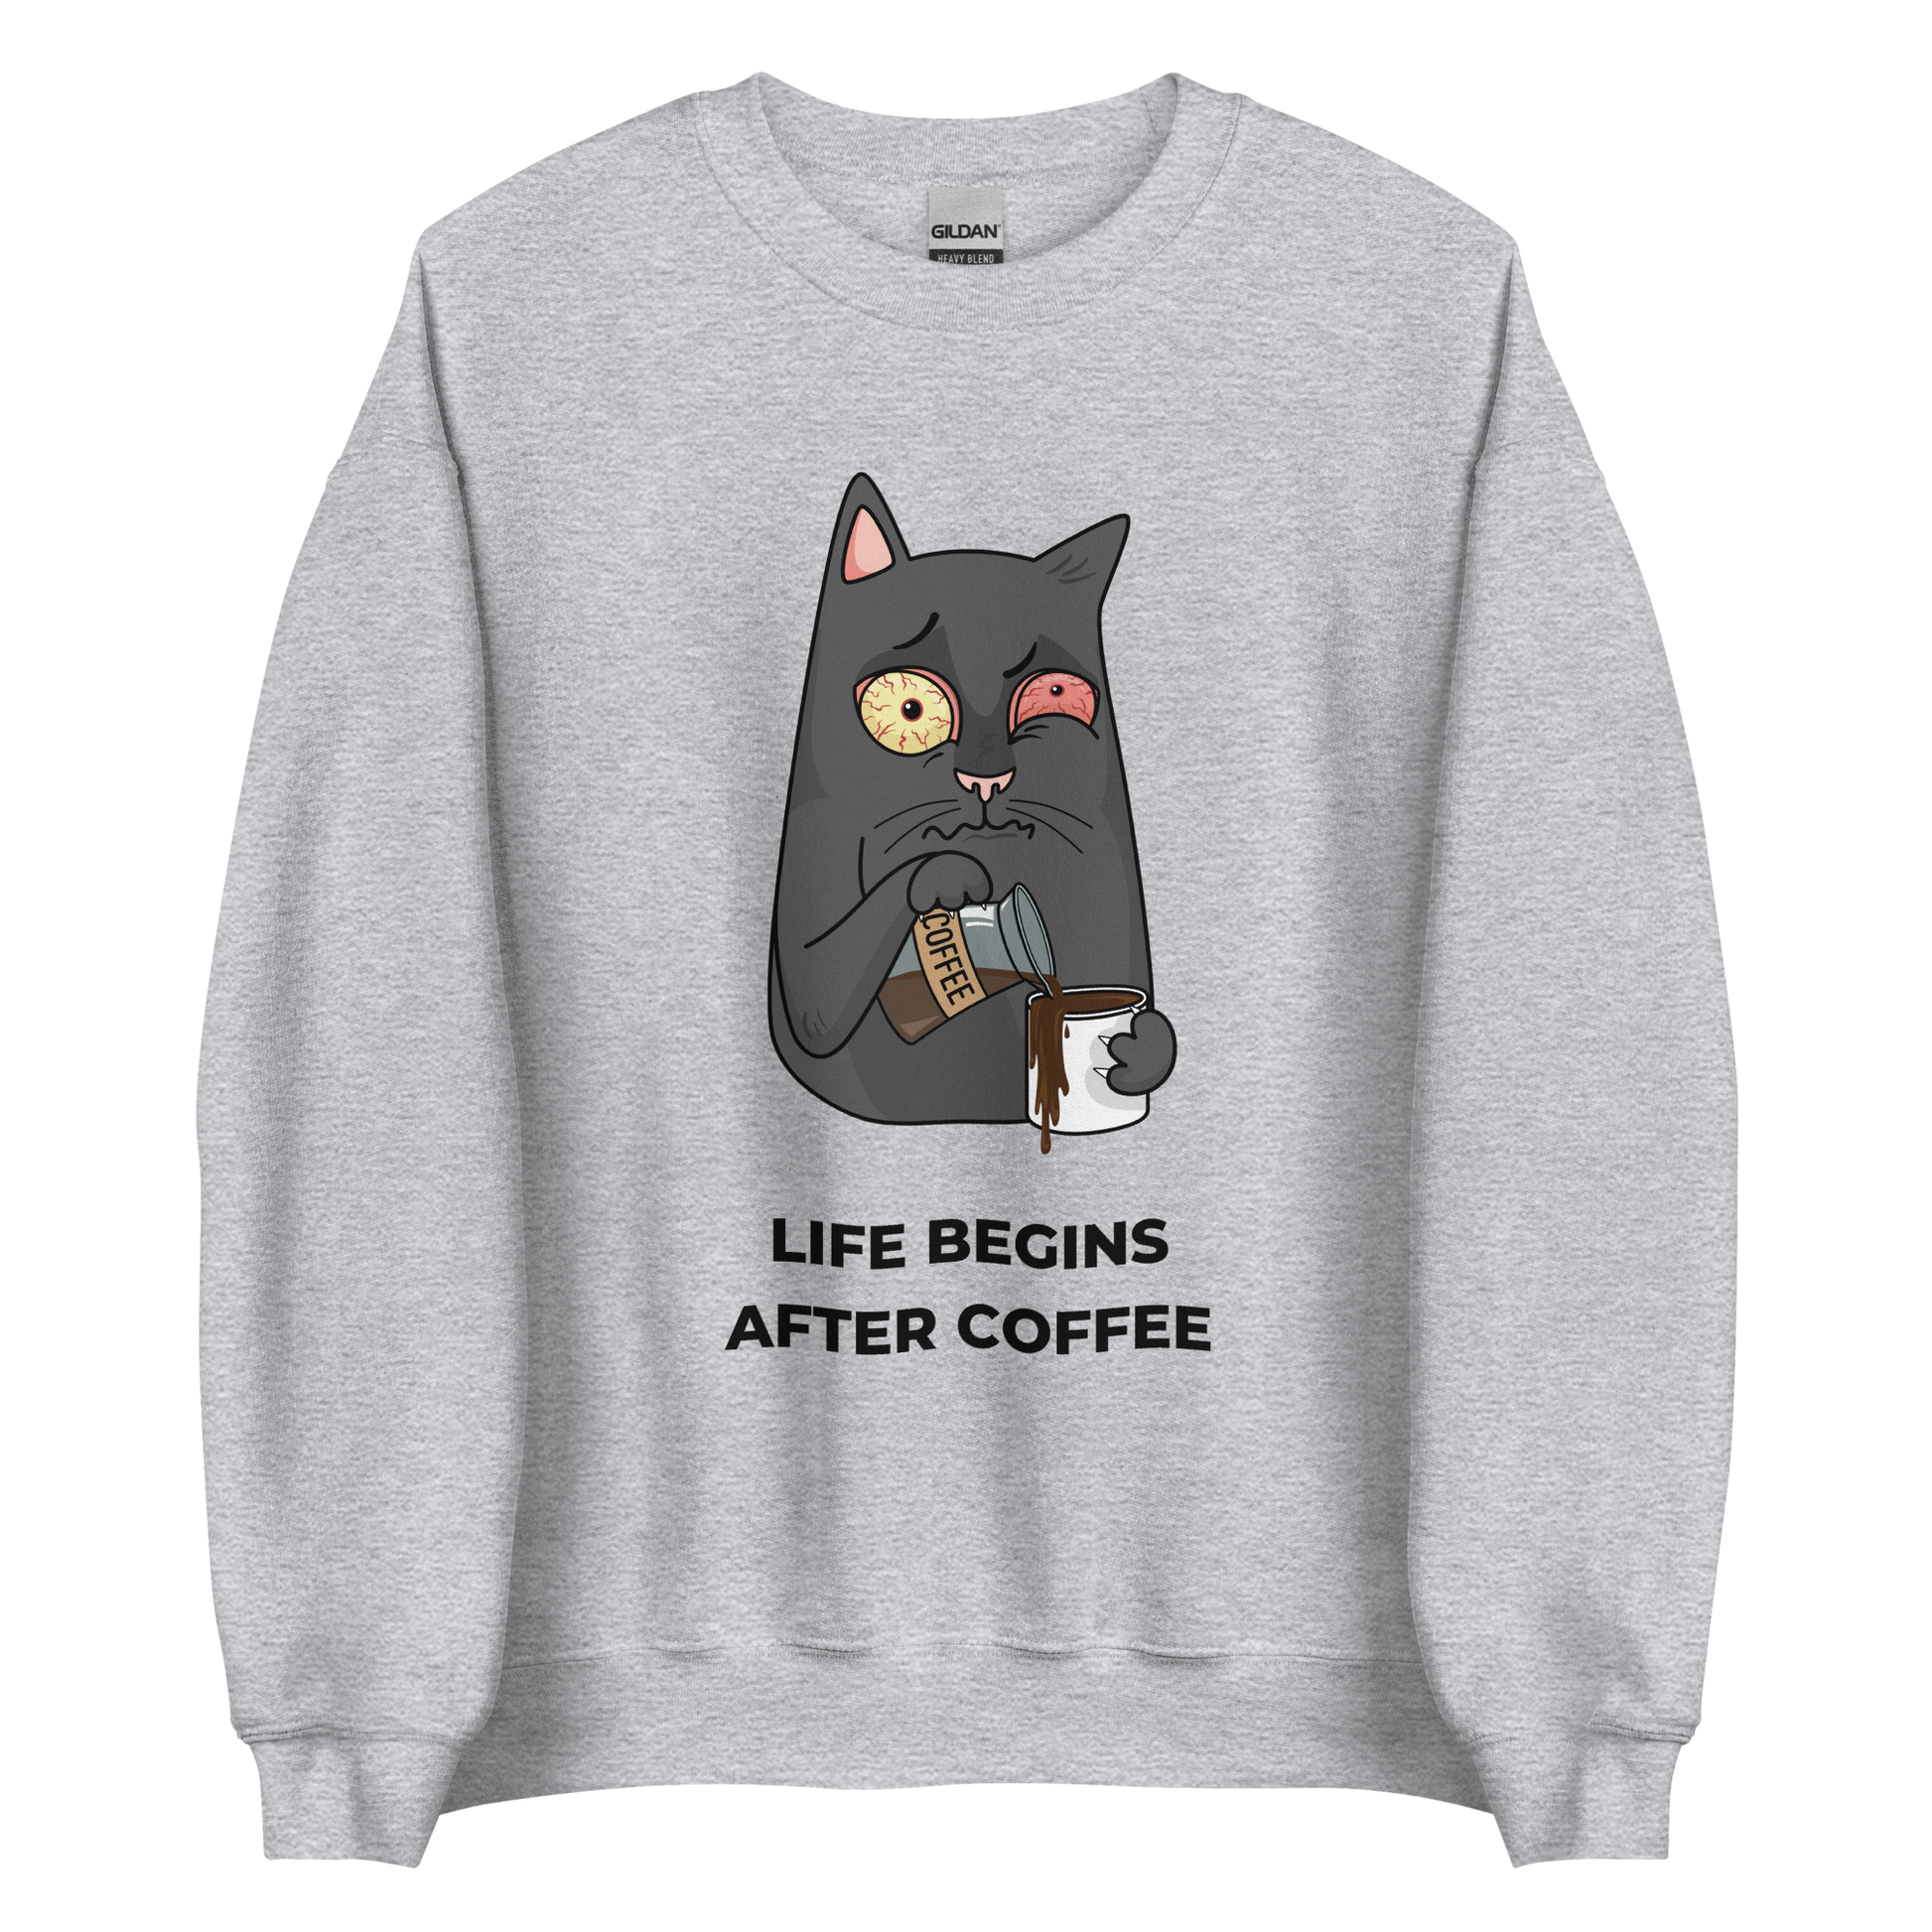 Sport Grey Cat Sweatshirt featuring a hilarious Life Begins After Coffee graphic on the chest - Funny Graphic Cat Sweatshirts - Boozy Fox